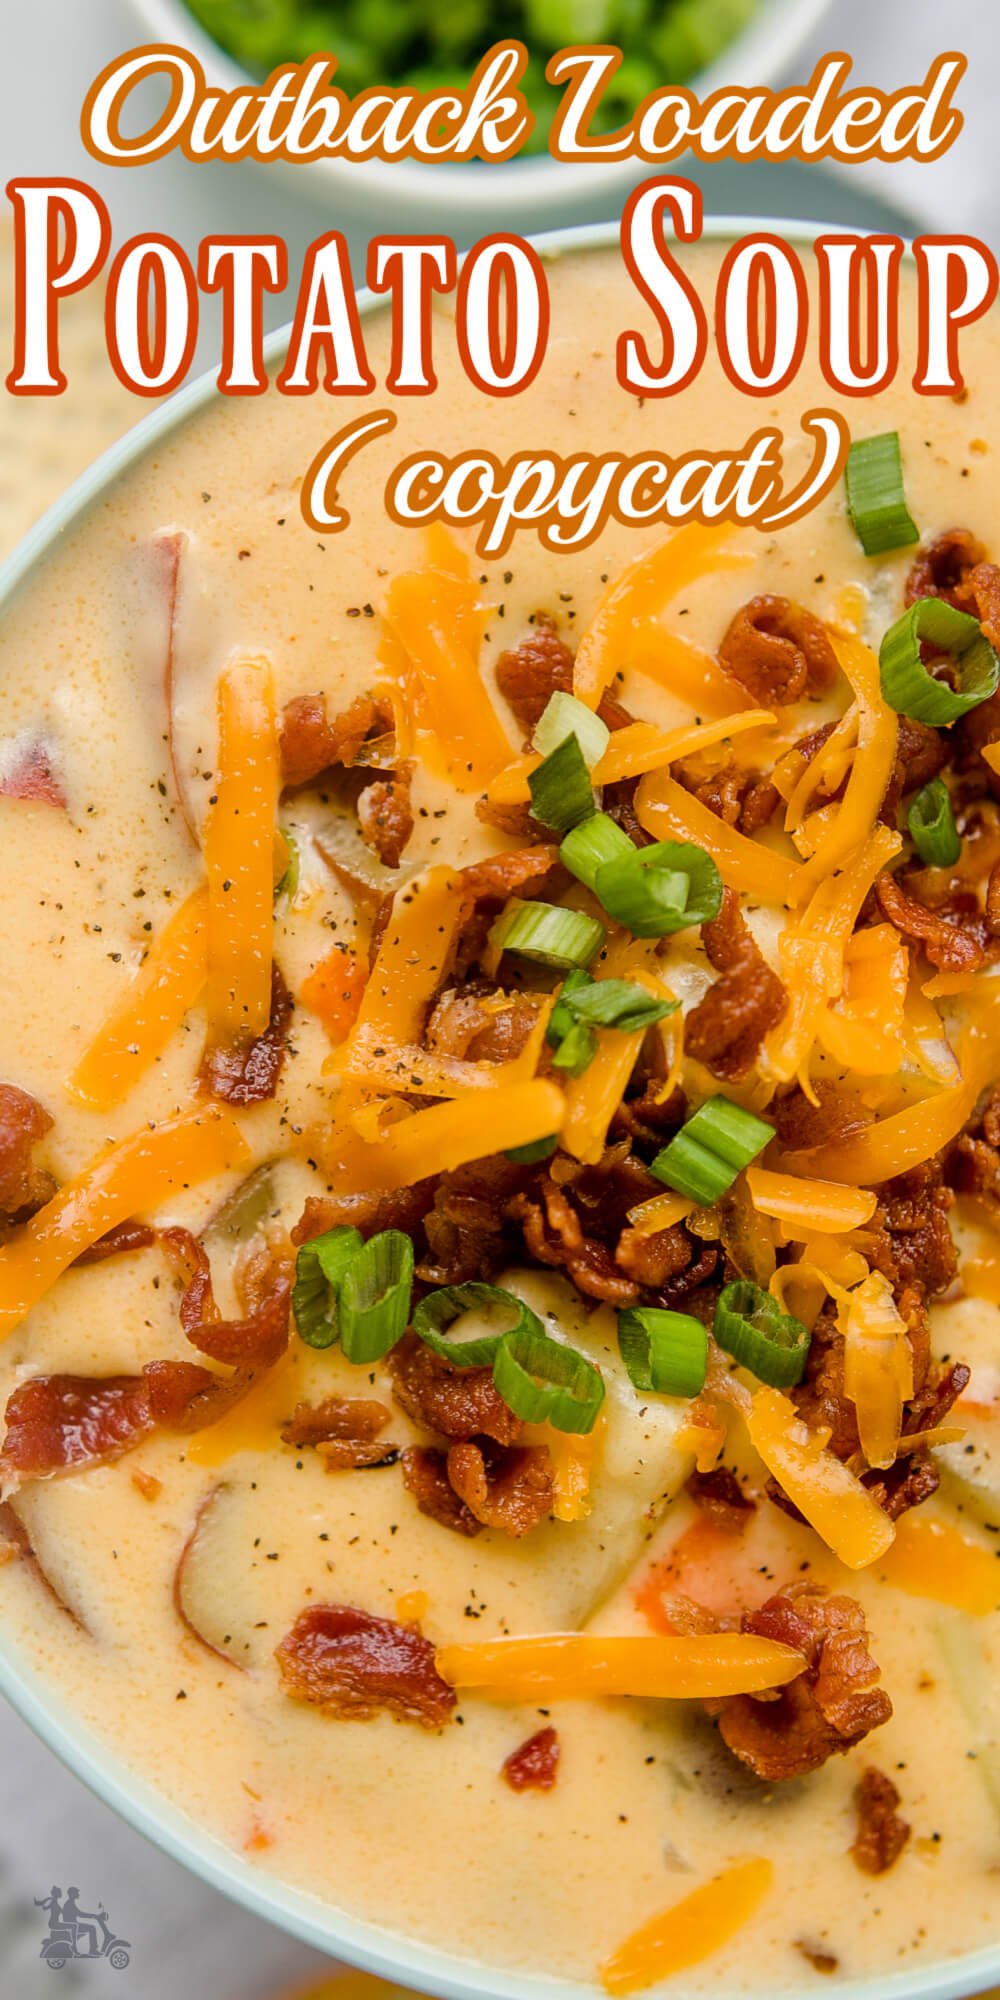 An easy and delicious cheesy potato soup recipe with simple ingredients that comes together in one pot! This copycat Outback Steakhouse soup is loaded with bacon and chunky potato goodness, this rich and creamy soup is a favorite comfort food at our house.